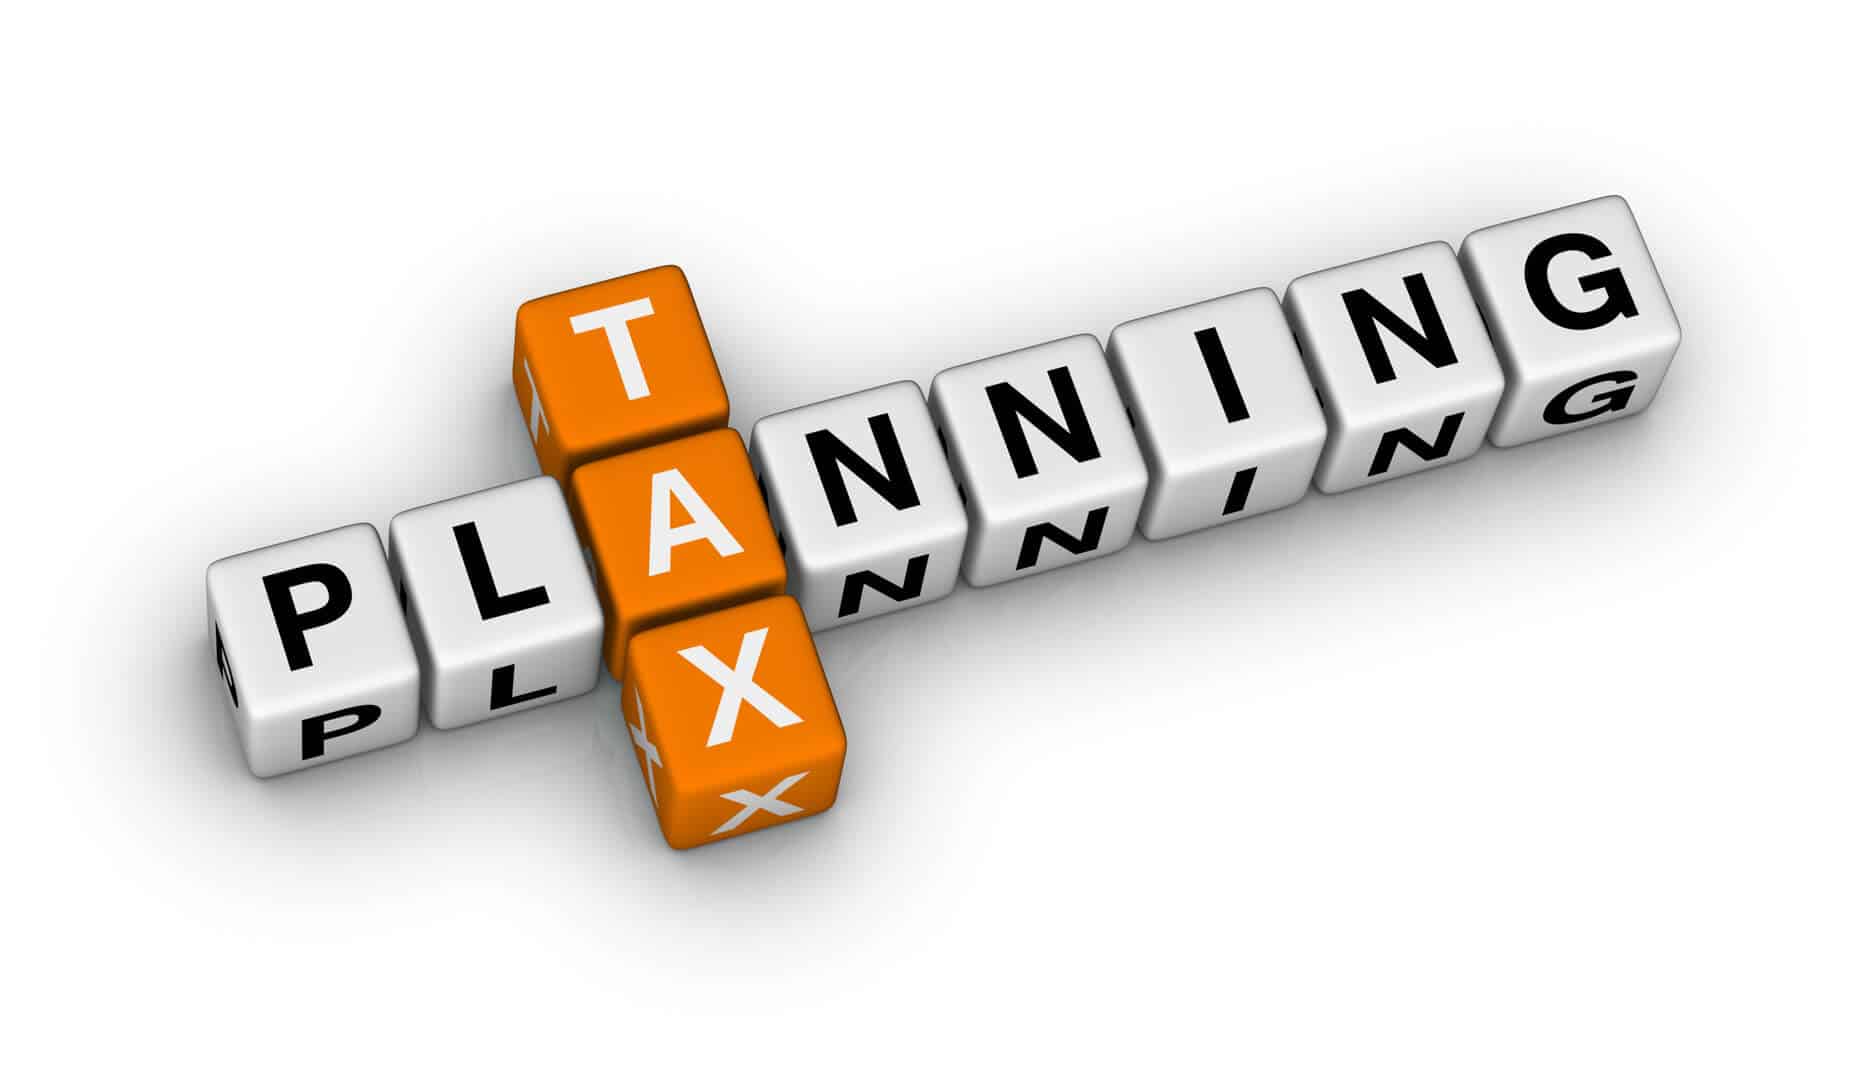 Early Tax Planning: The Secret to a Bigger Tax Refund